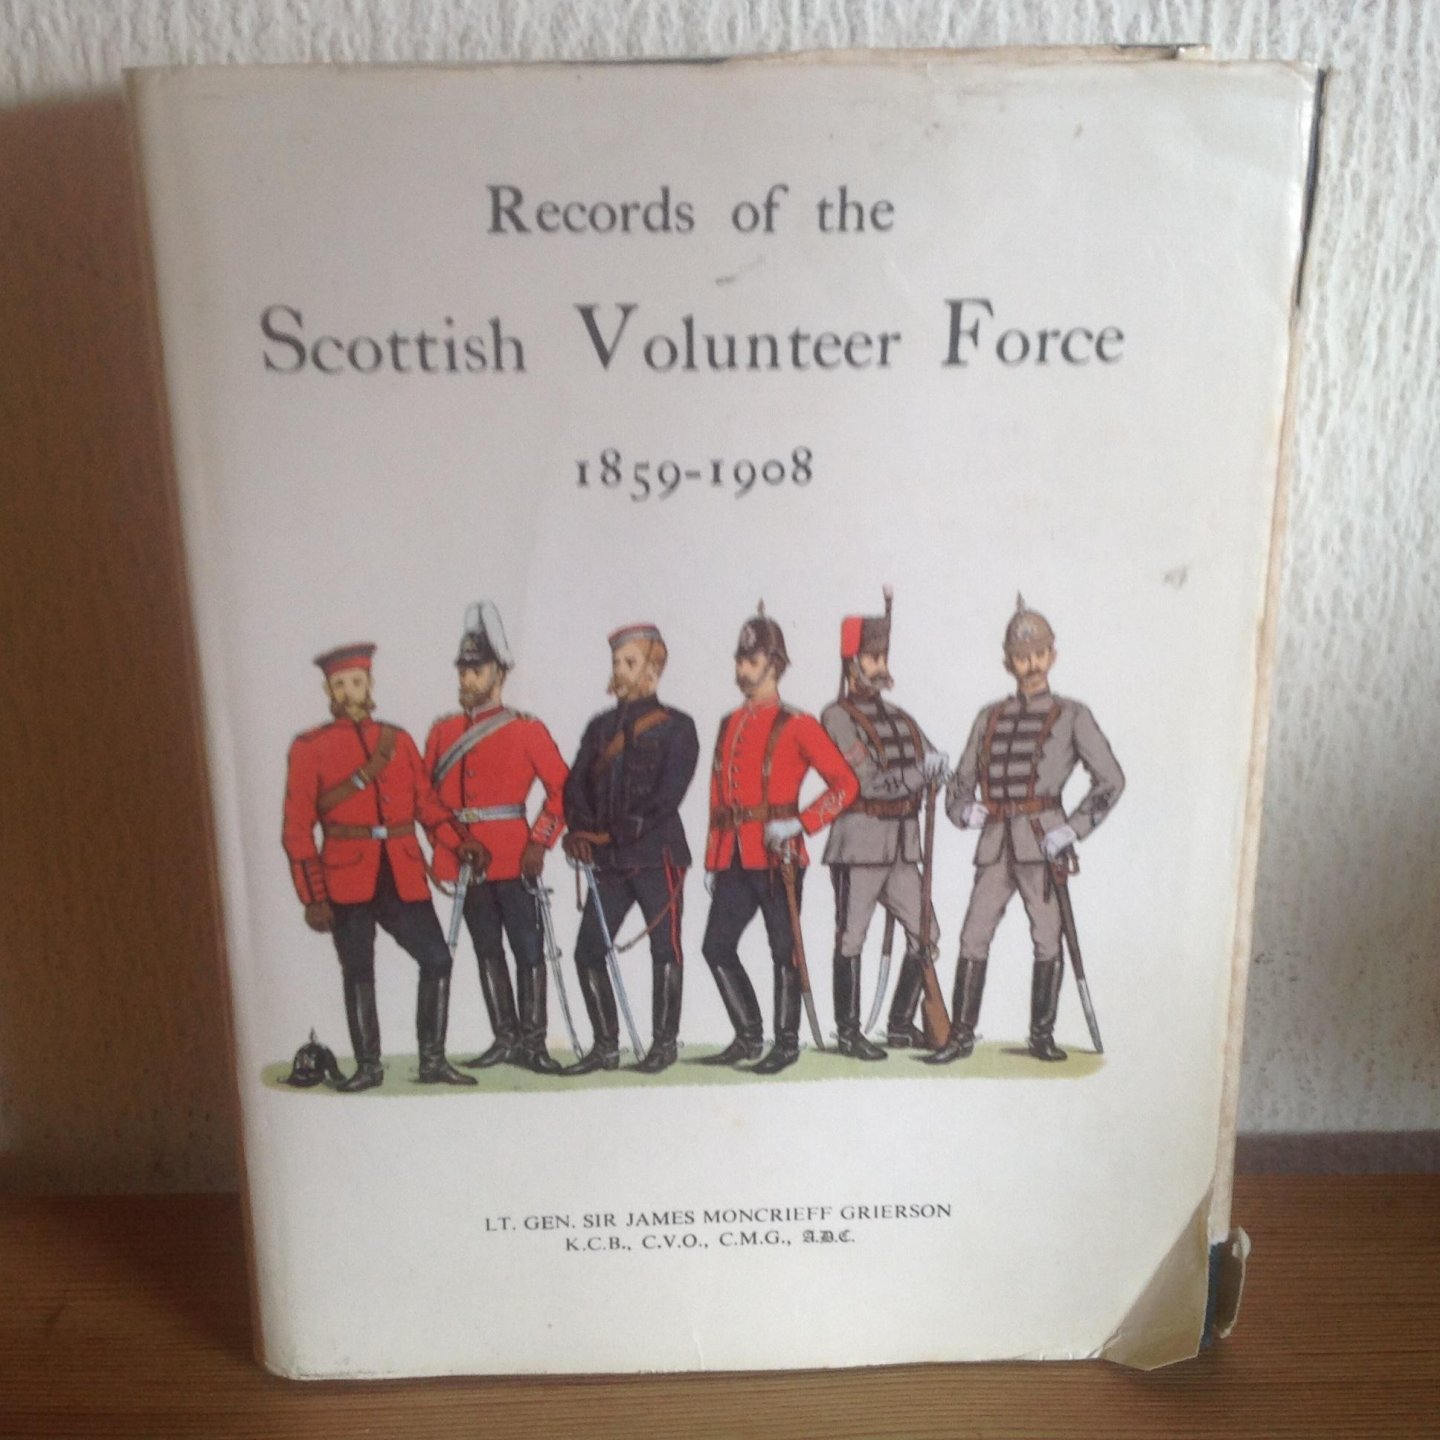 Sir James Moncrieff Grierson - Records of the SCOTTISH VOLUNTEER FORCE , 1859-1908